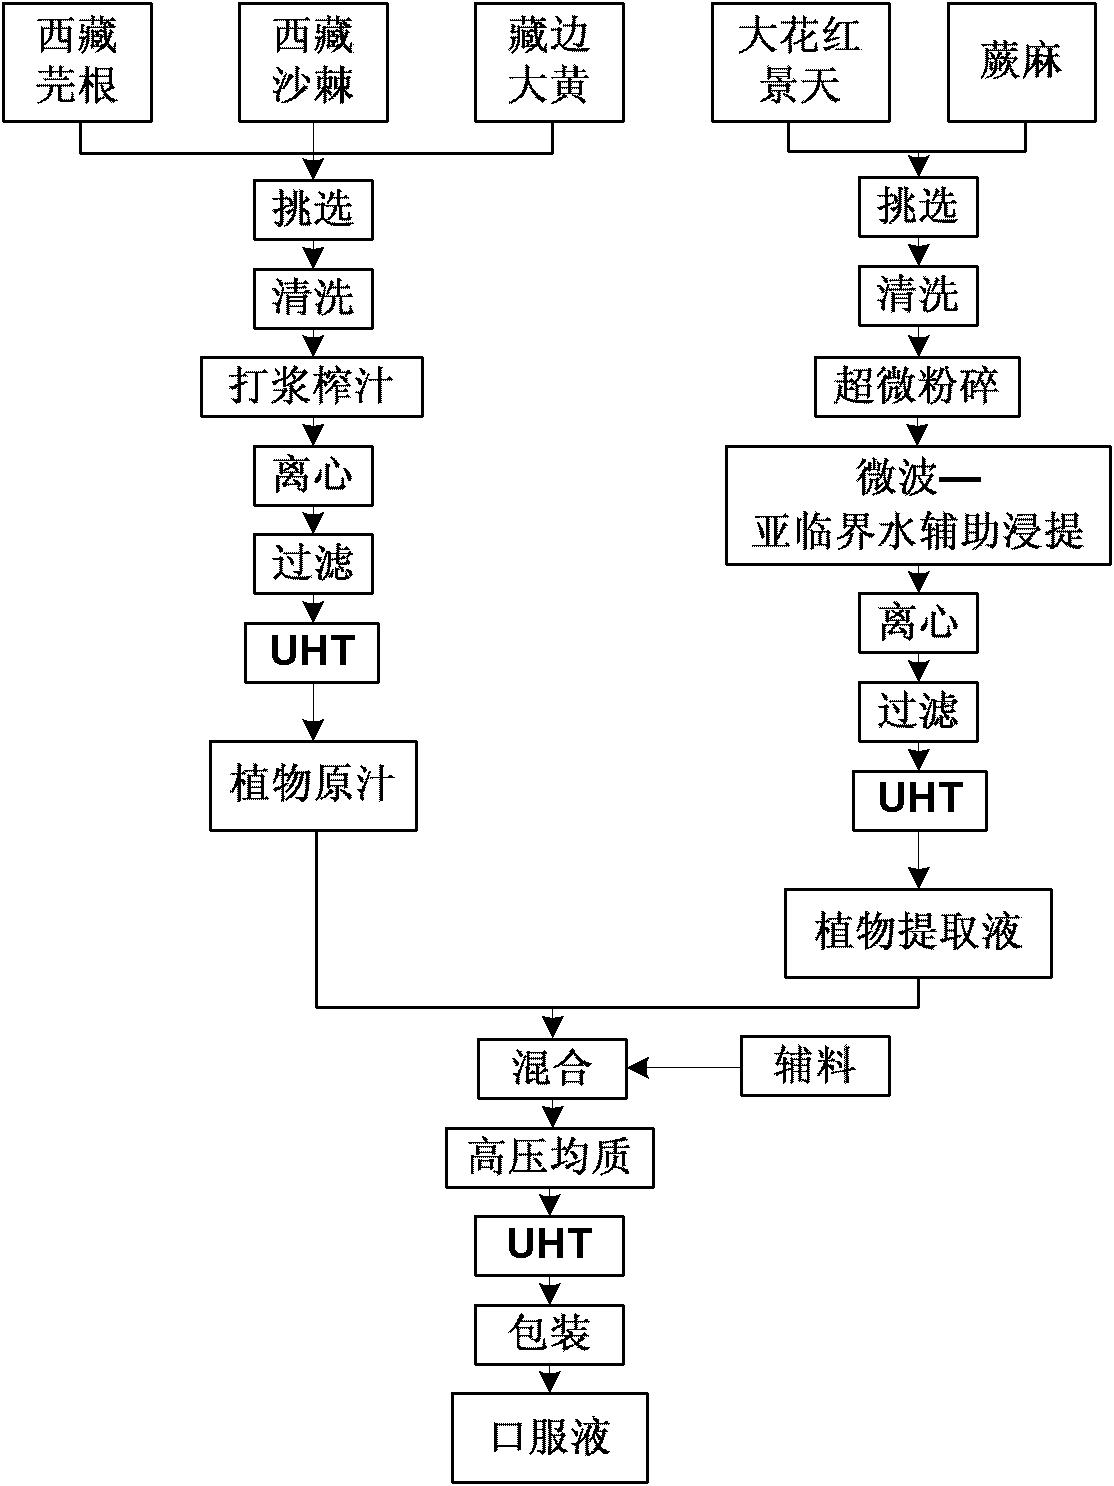 Oral liquid for treating high altitude disease (HAD) and preparation method thereof